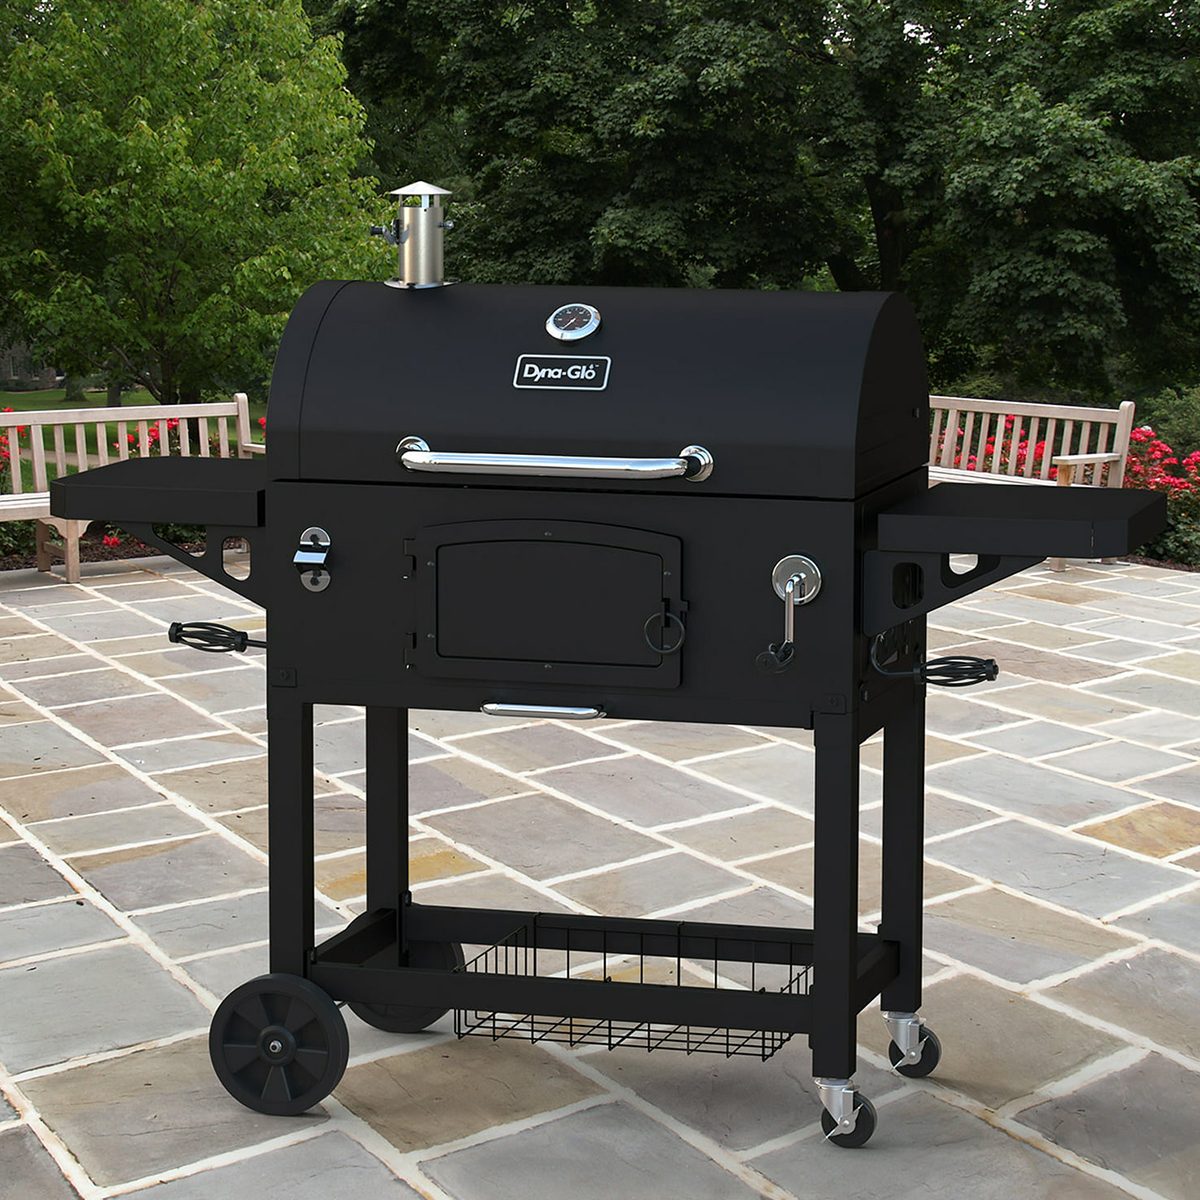 The 5 best ways to organize barbecue equipment, say pros